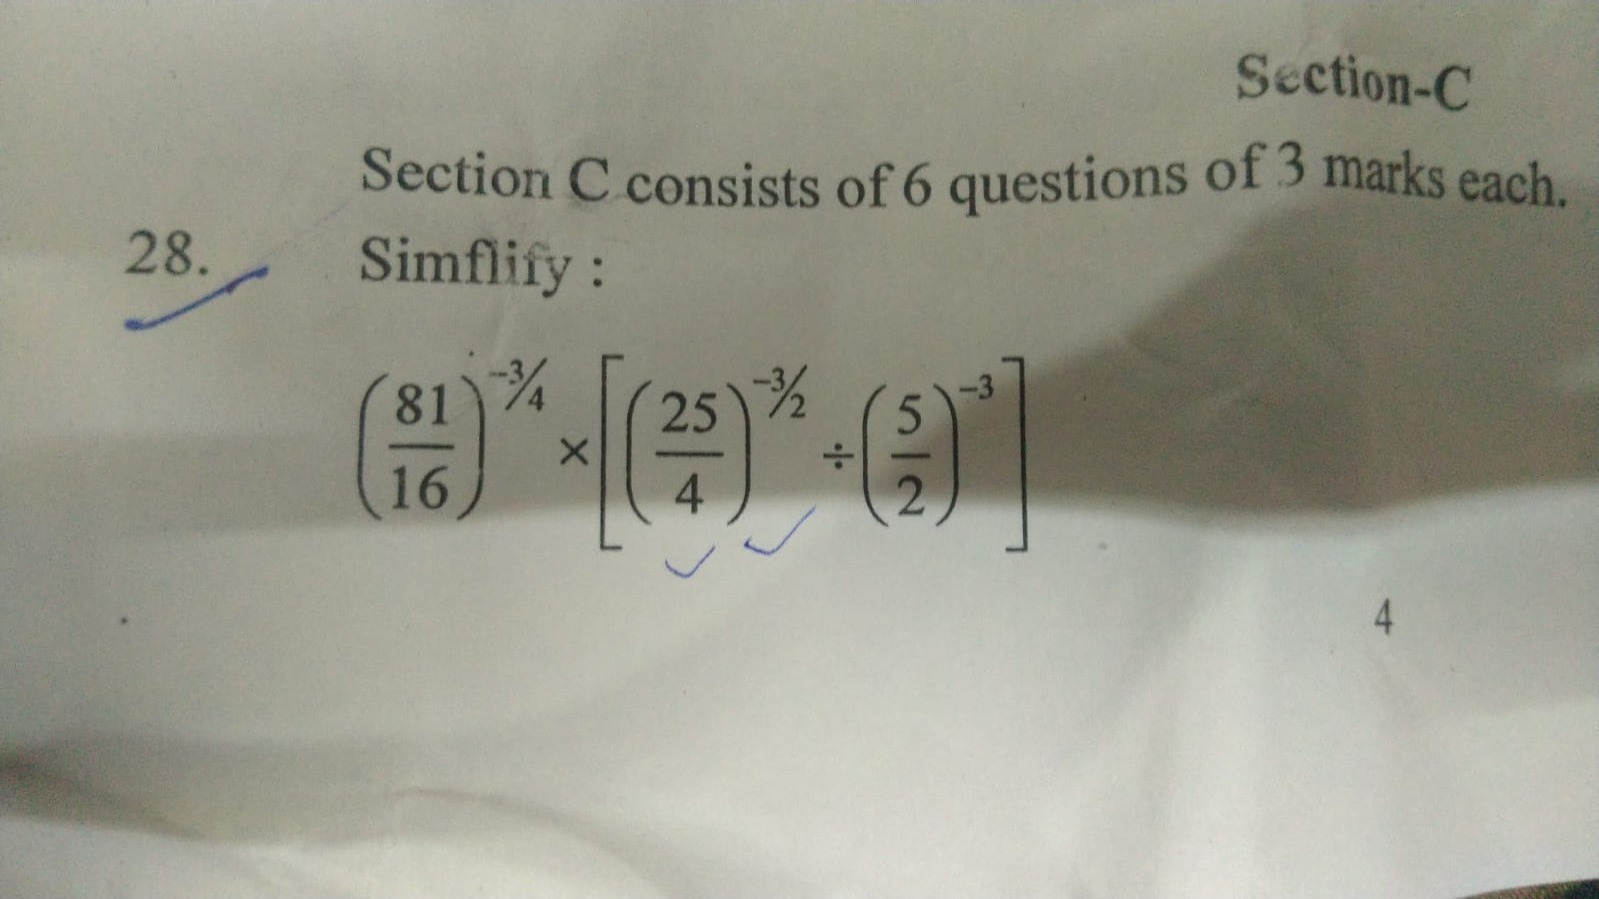 Section-C
Section C consists of 6 questions of 3 marks each.
28. Simfl